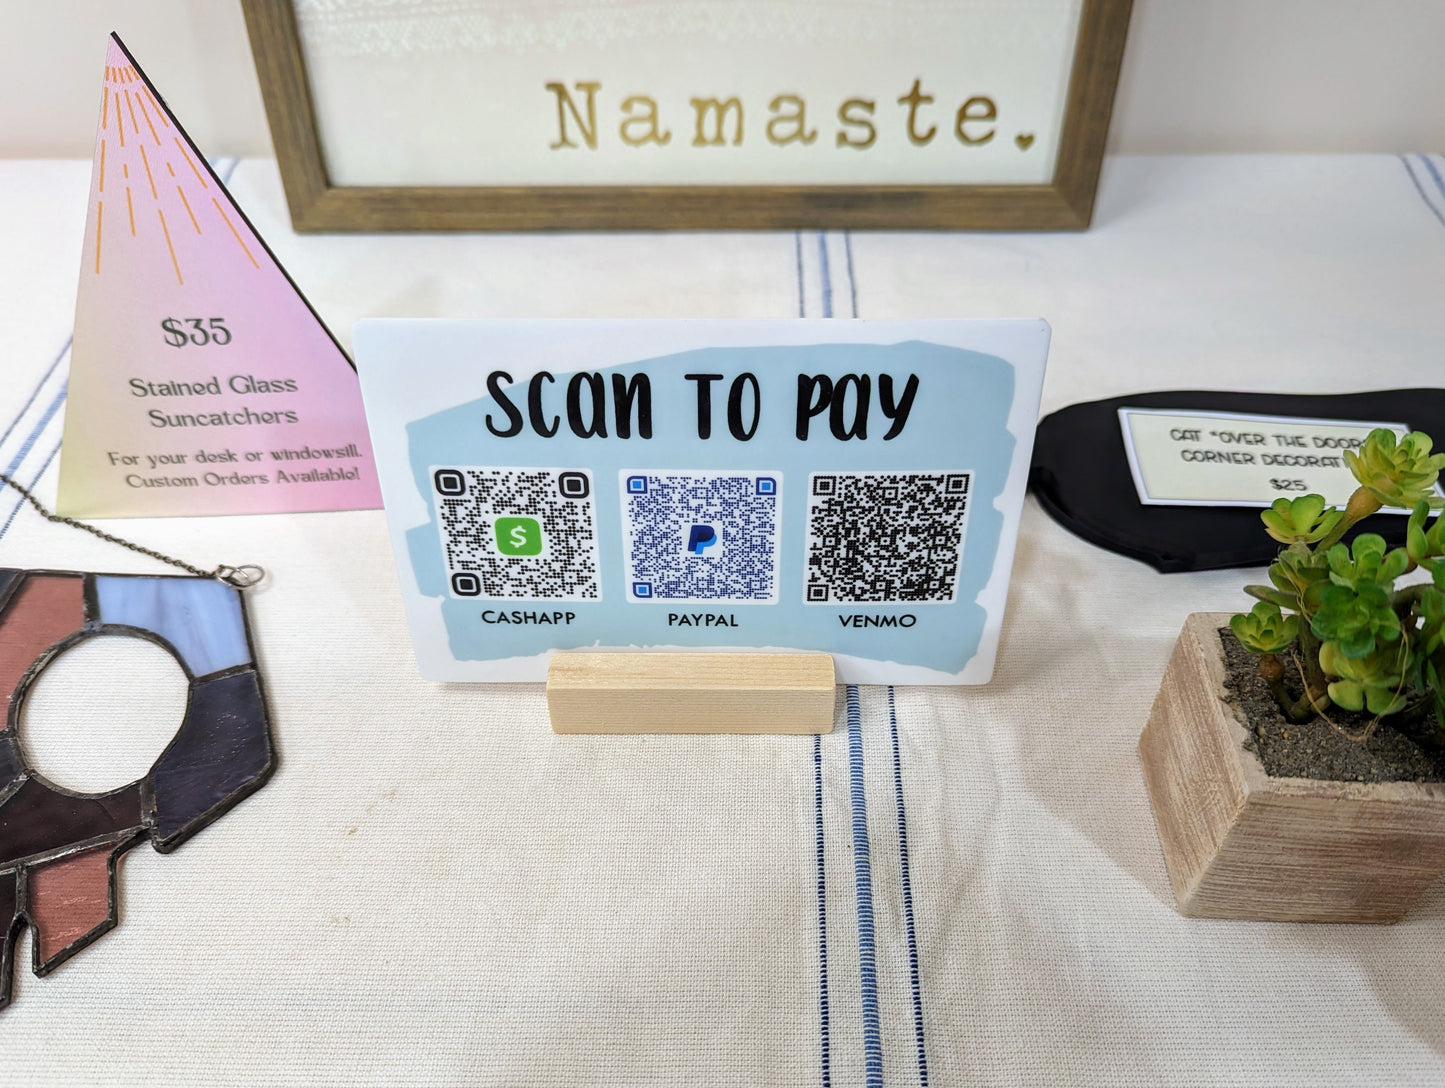 QR Codes "Scan to Pay" Sign With Stand